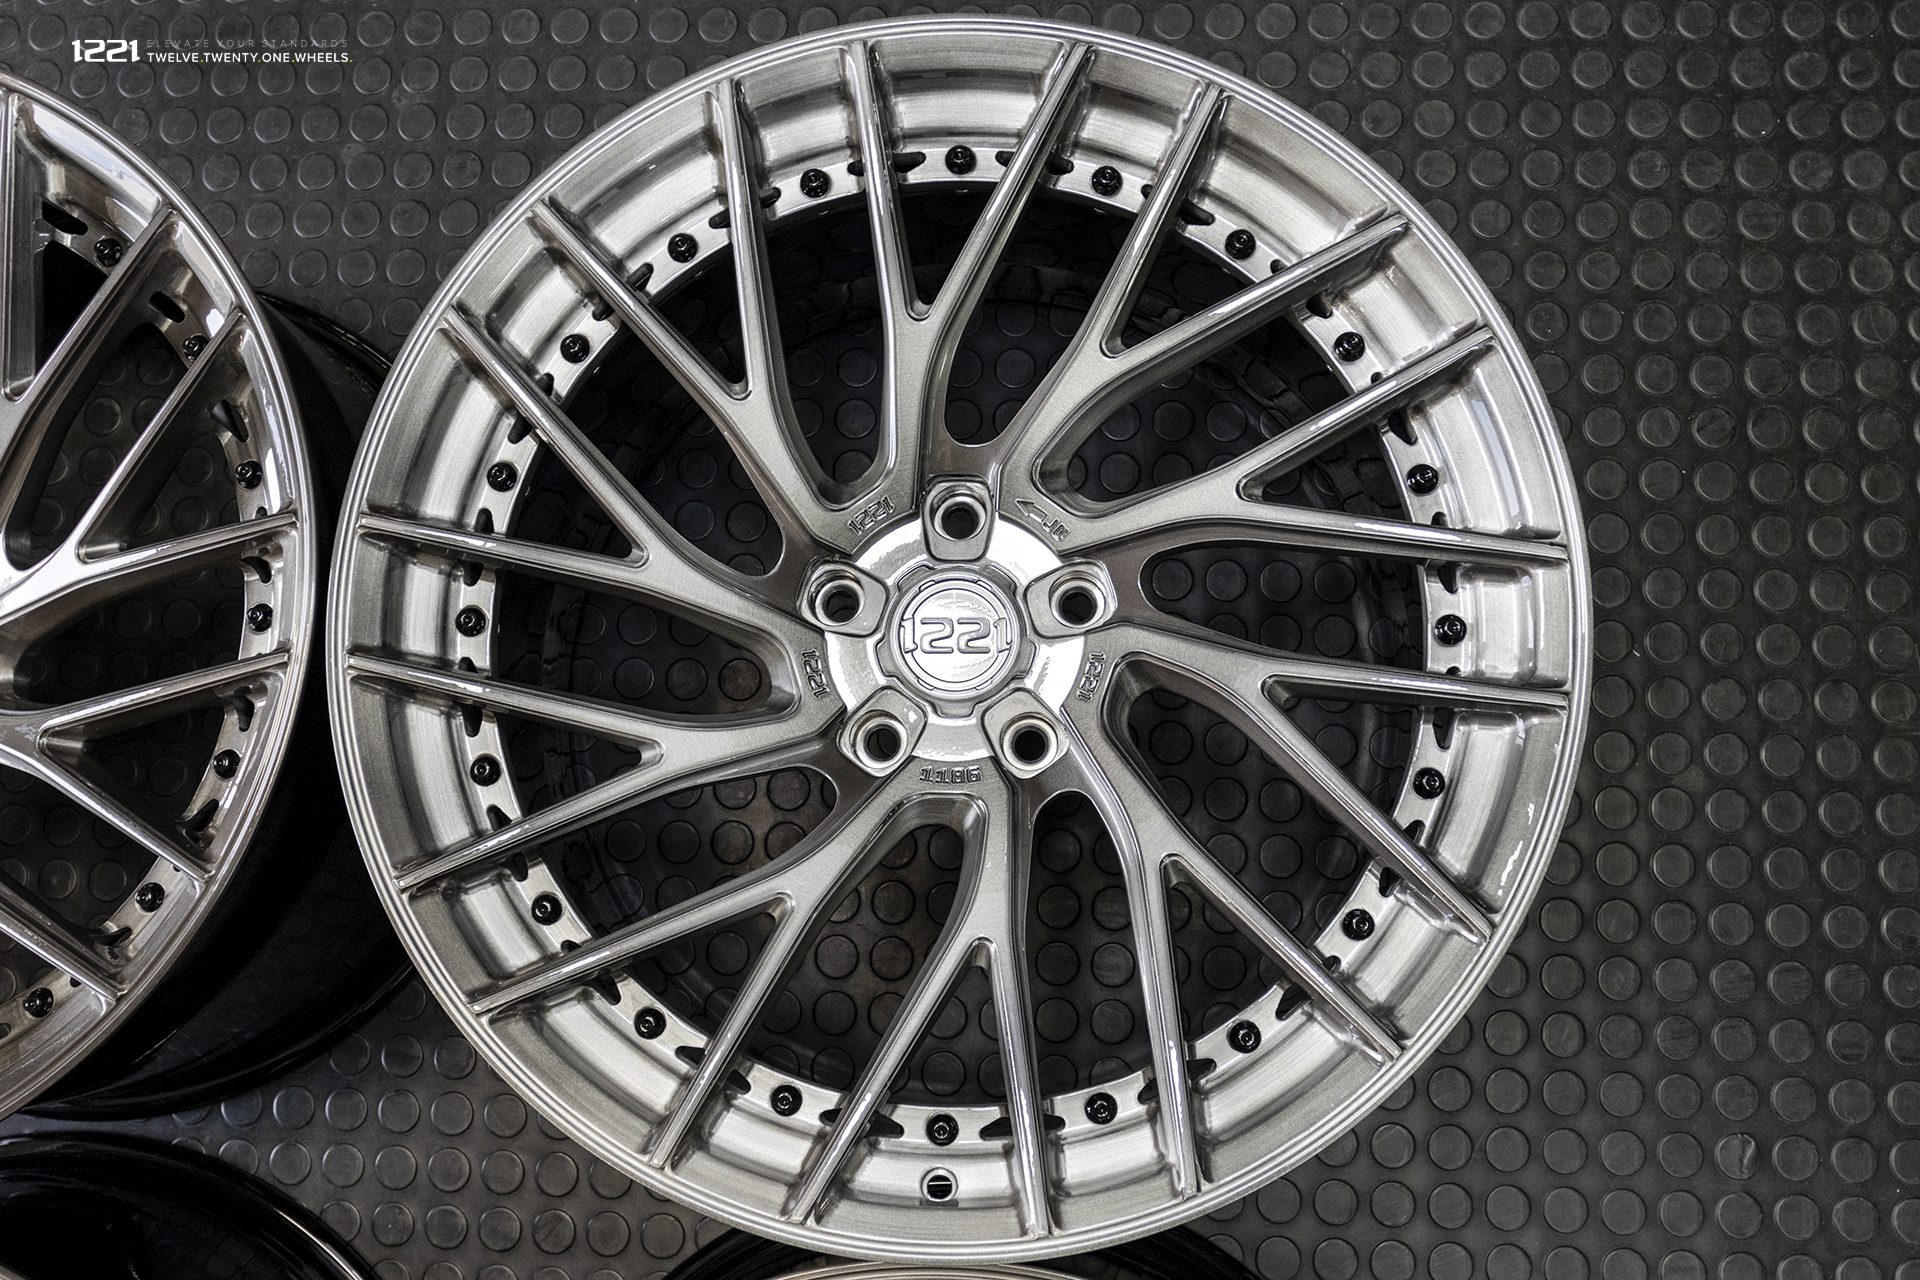 Rotational Concave Forged Wheels